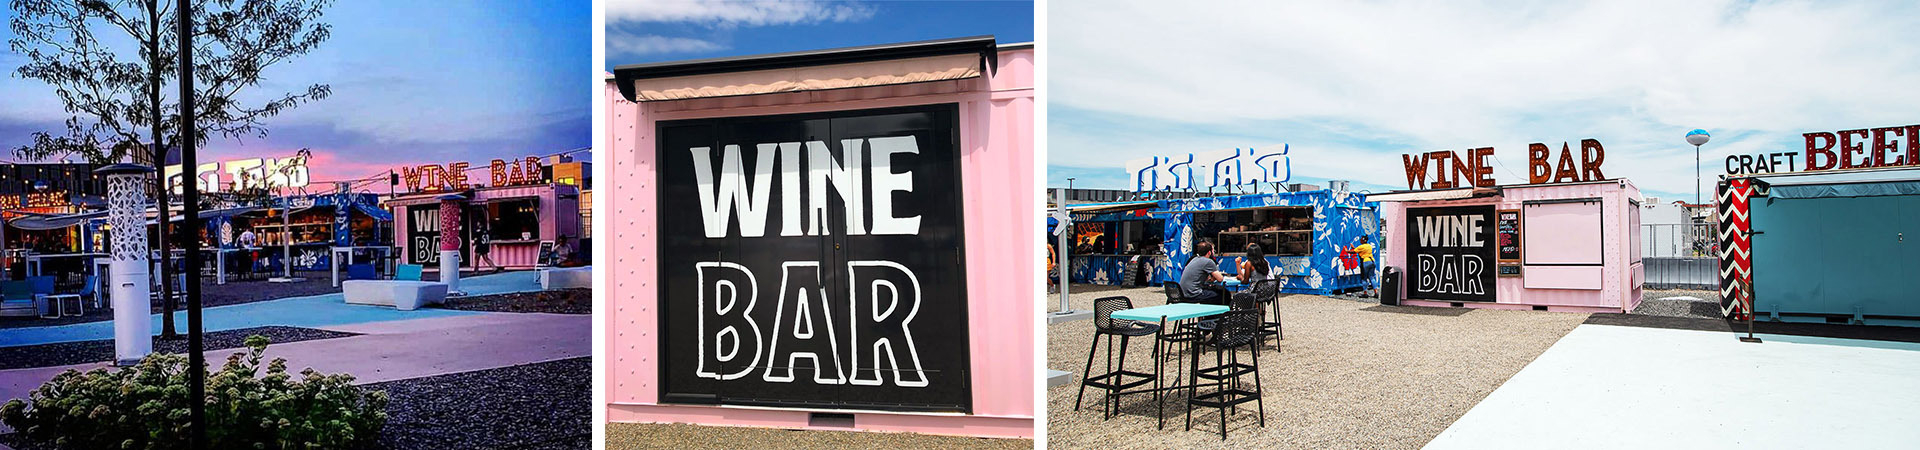 Custom shipping containers for a wine bar with graphics and seats.